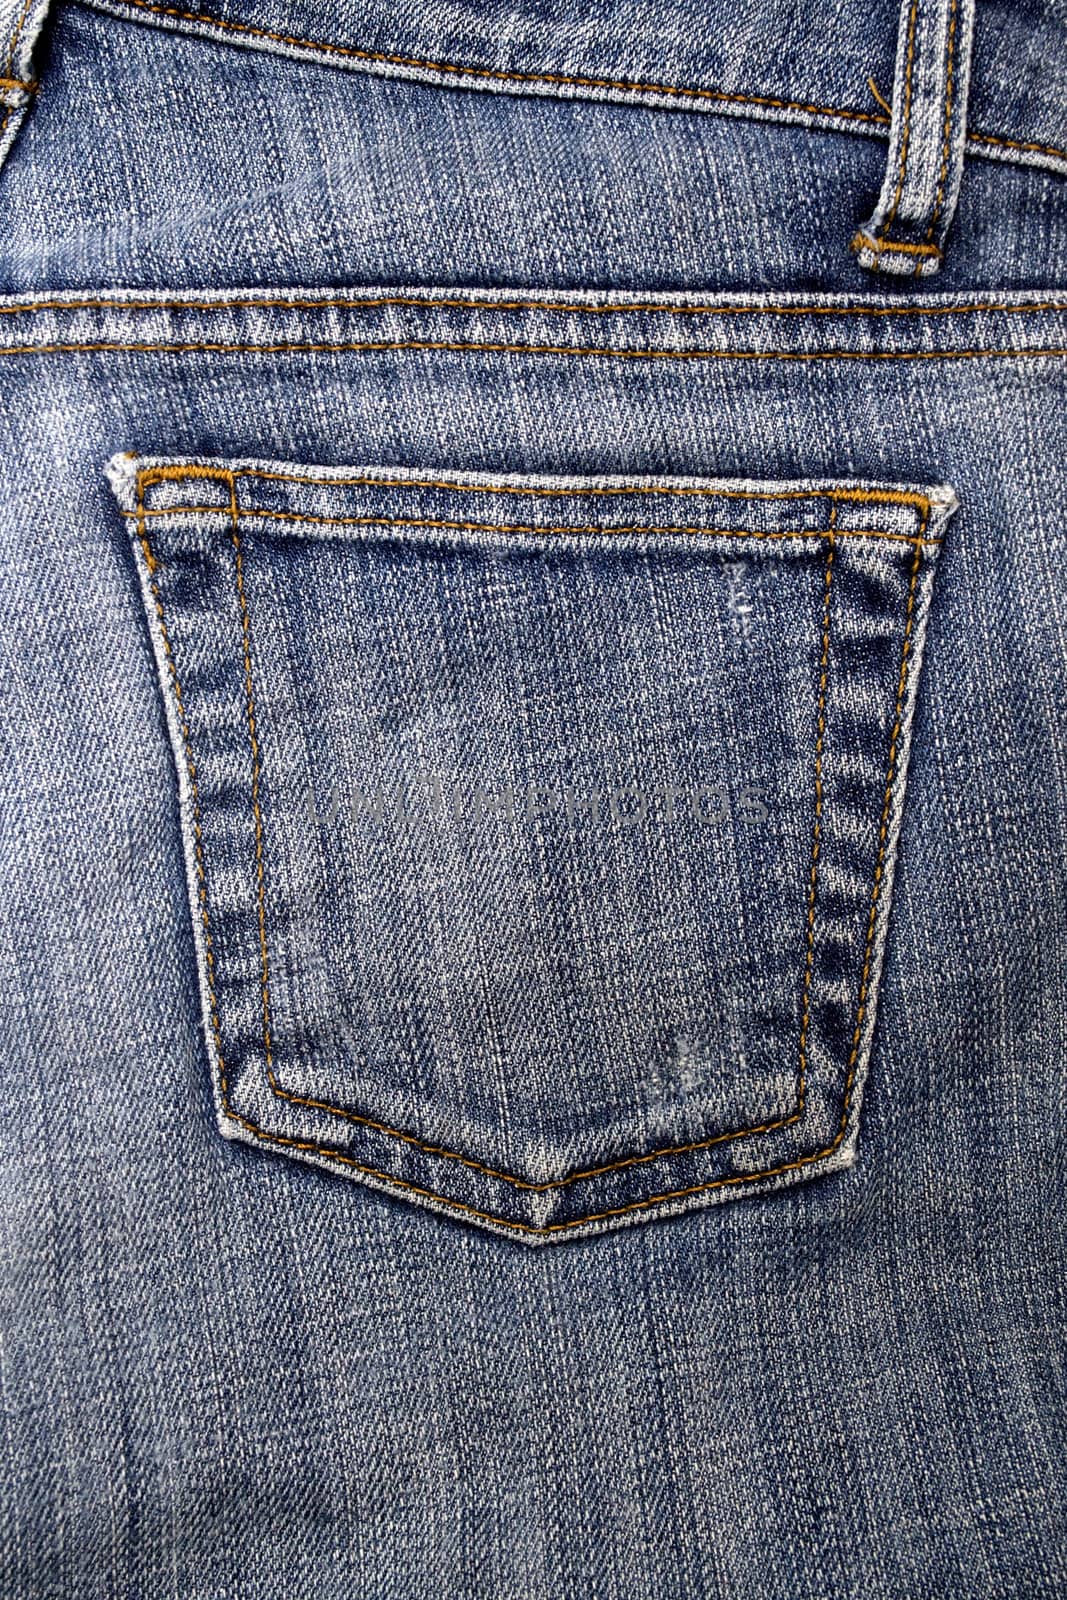 Close up image of denim jeans pocket with a ripped hole